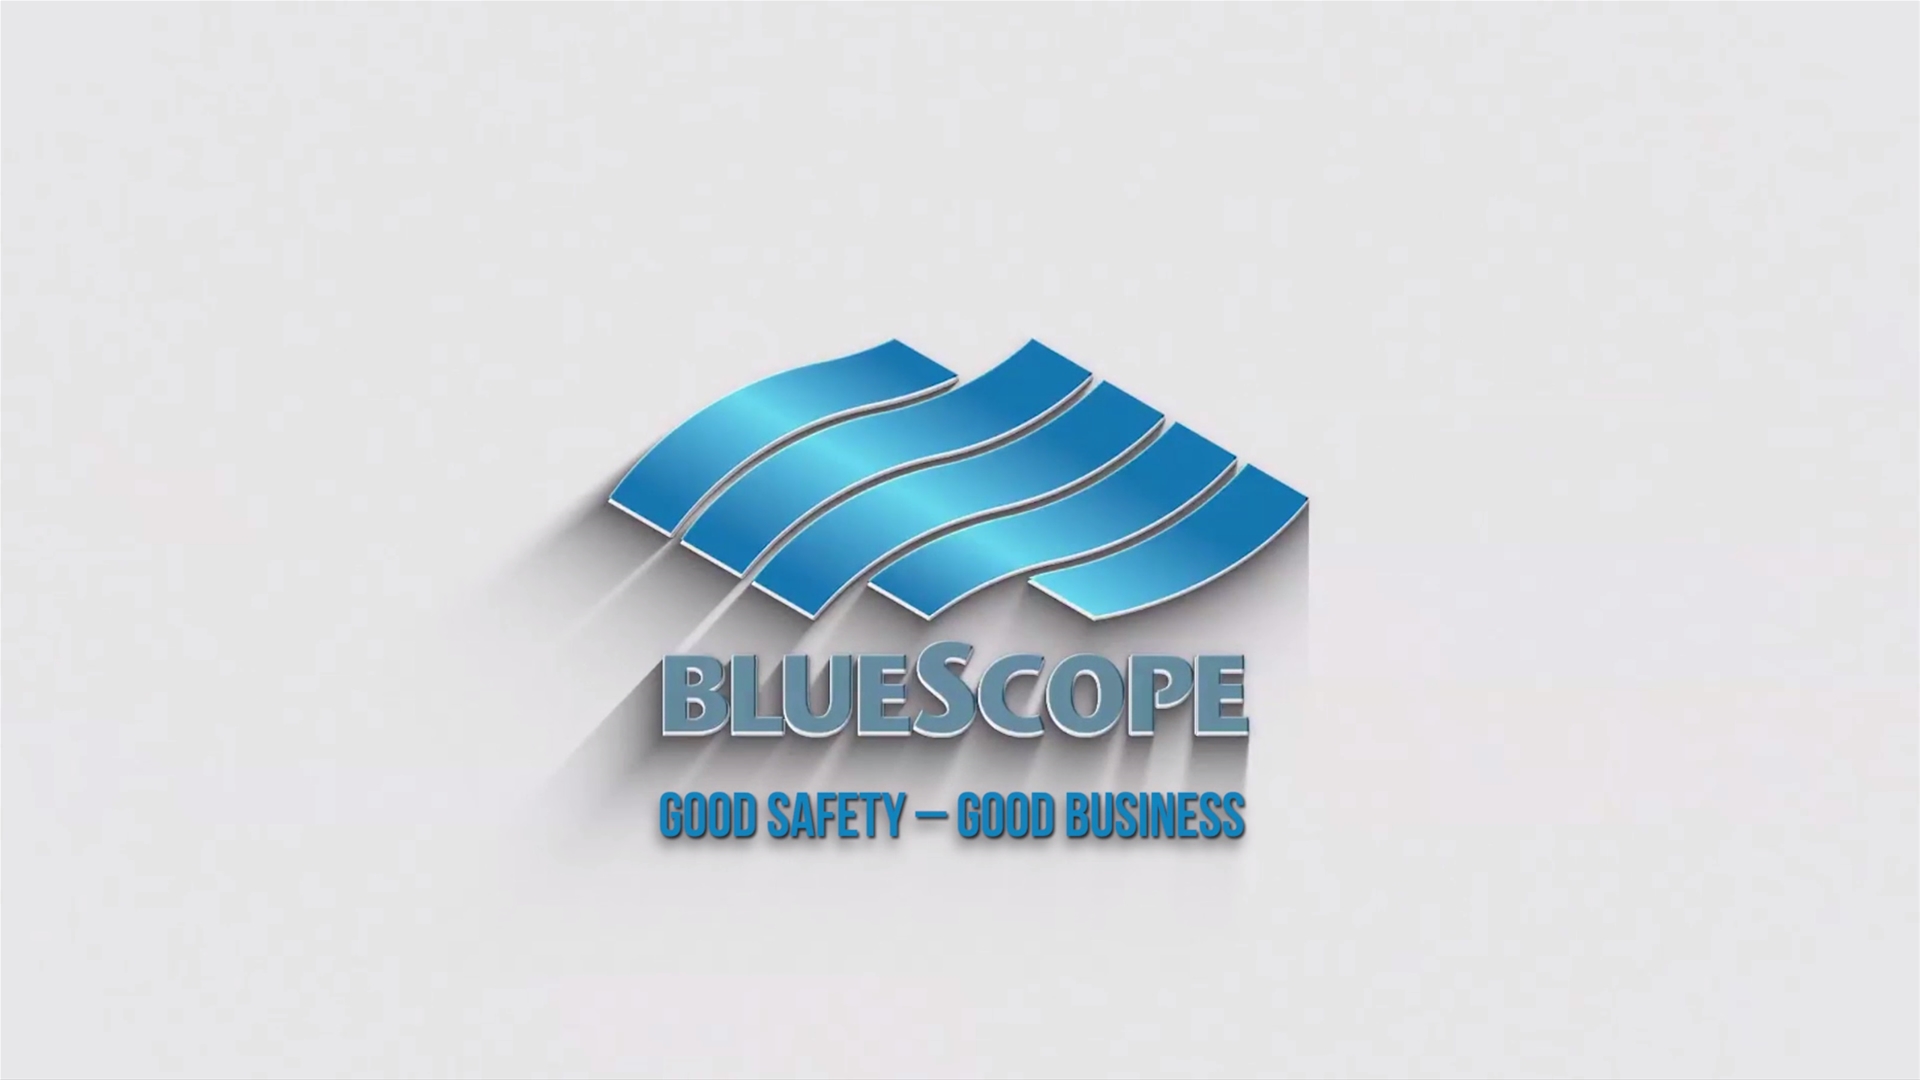 GOOD SAFETY – GOOD BUSINESS